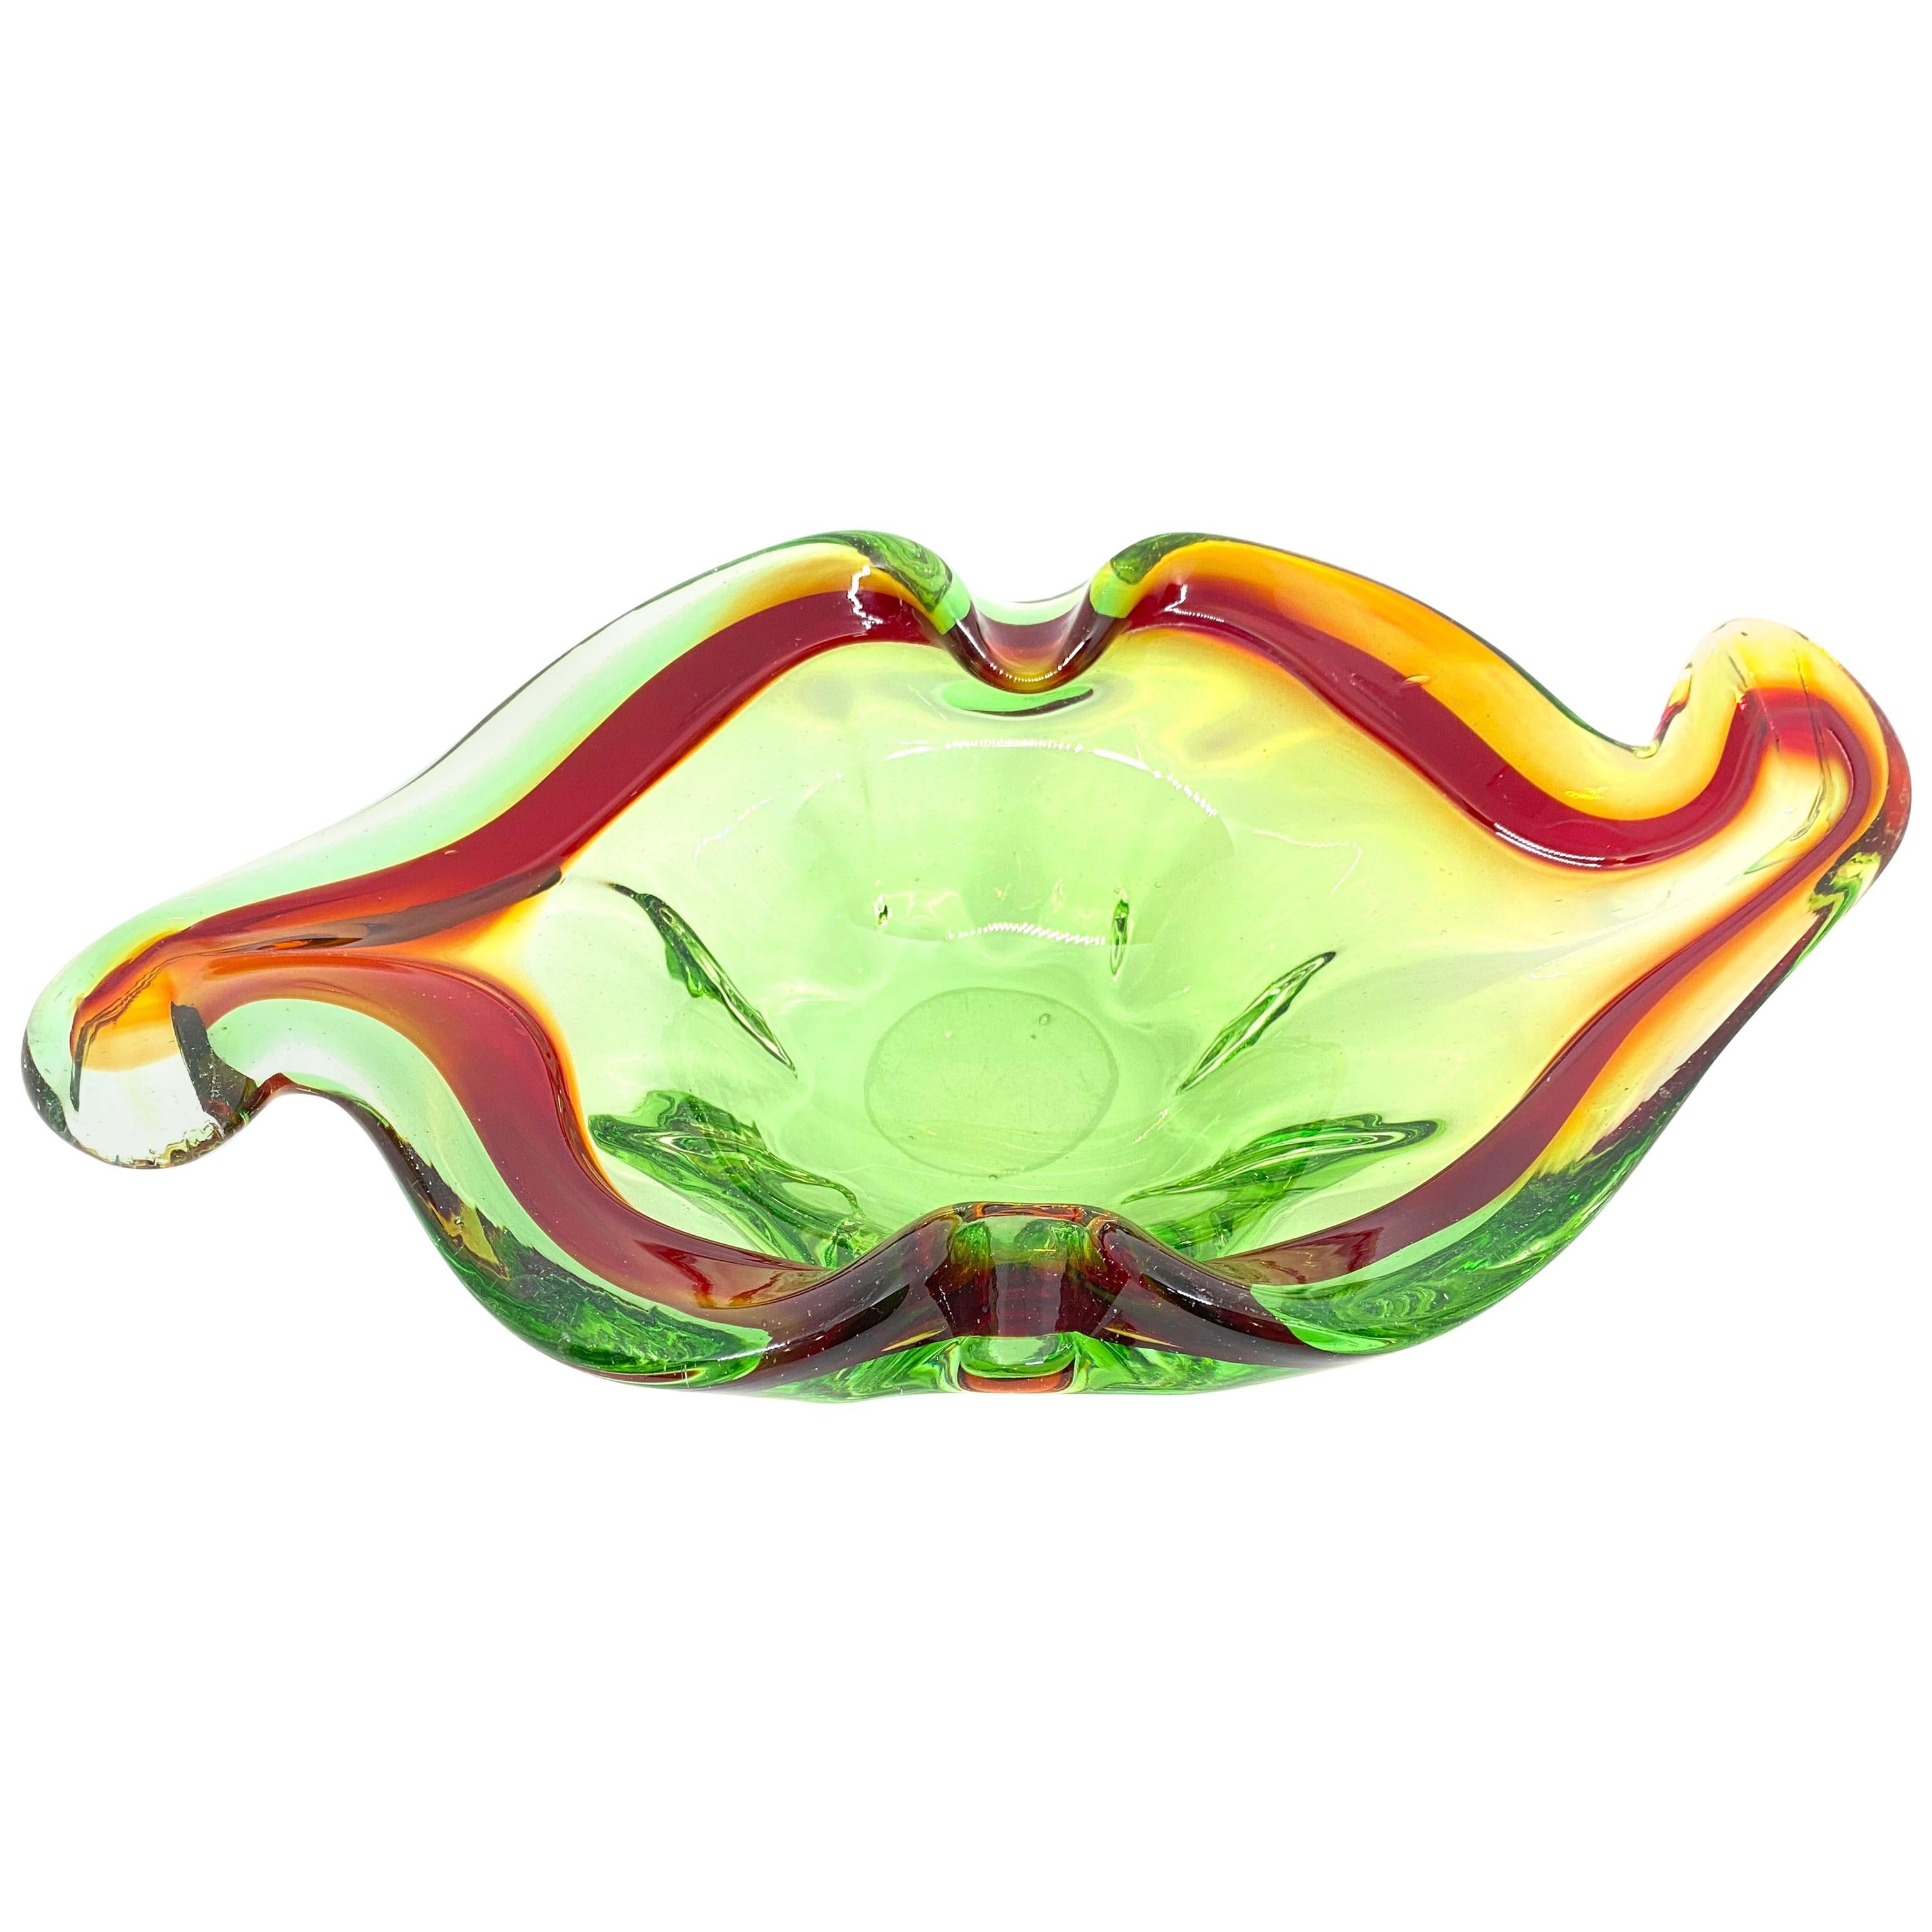 Murano Art Glass Sommerso Bowl Catchall Red and Green Vintage, Italy